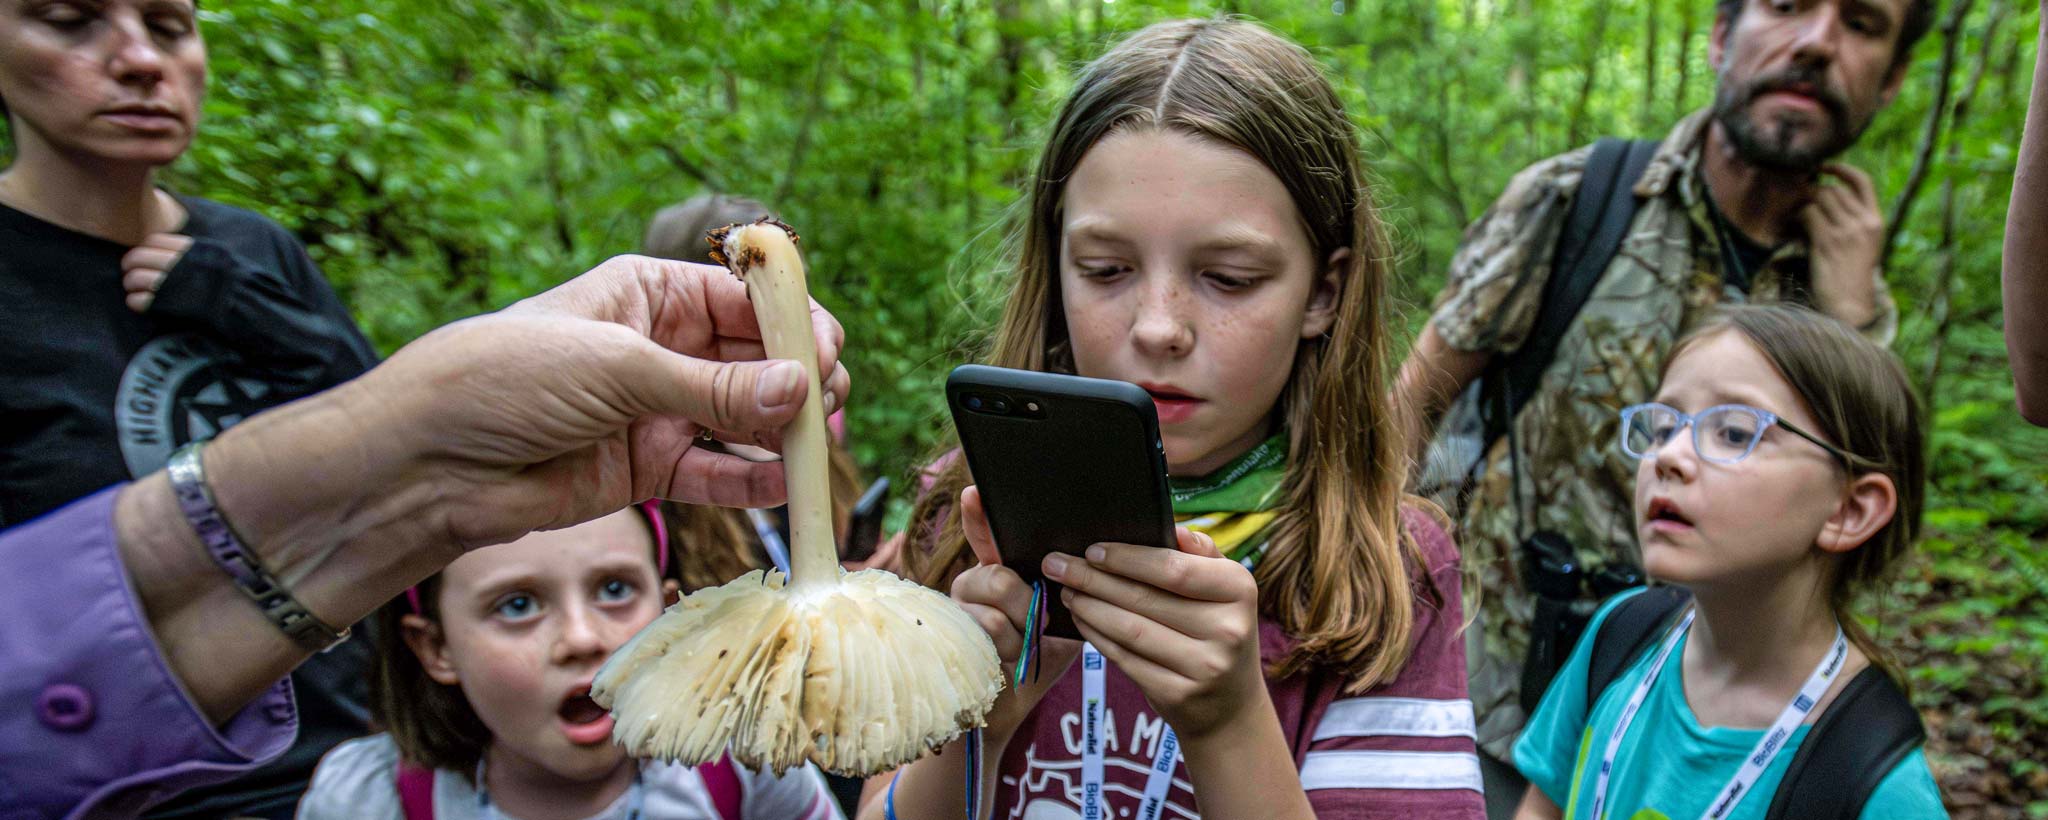 A group of children and adults inspect a fungus during the BioBlitz event at Norris Lake.